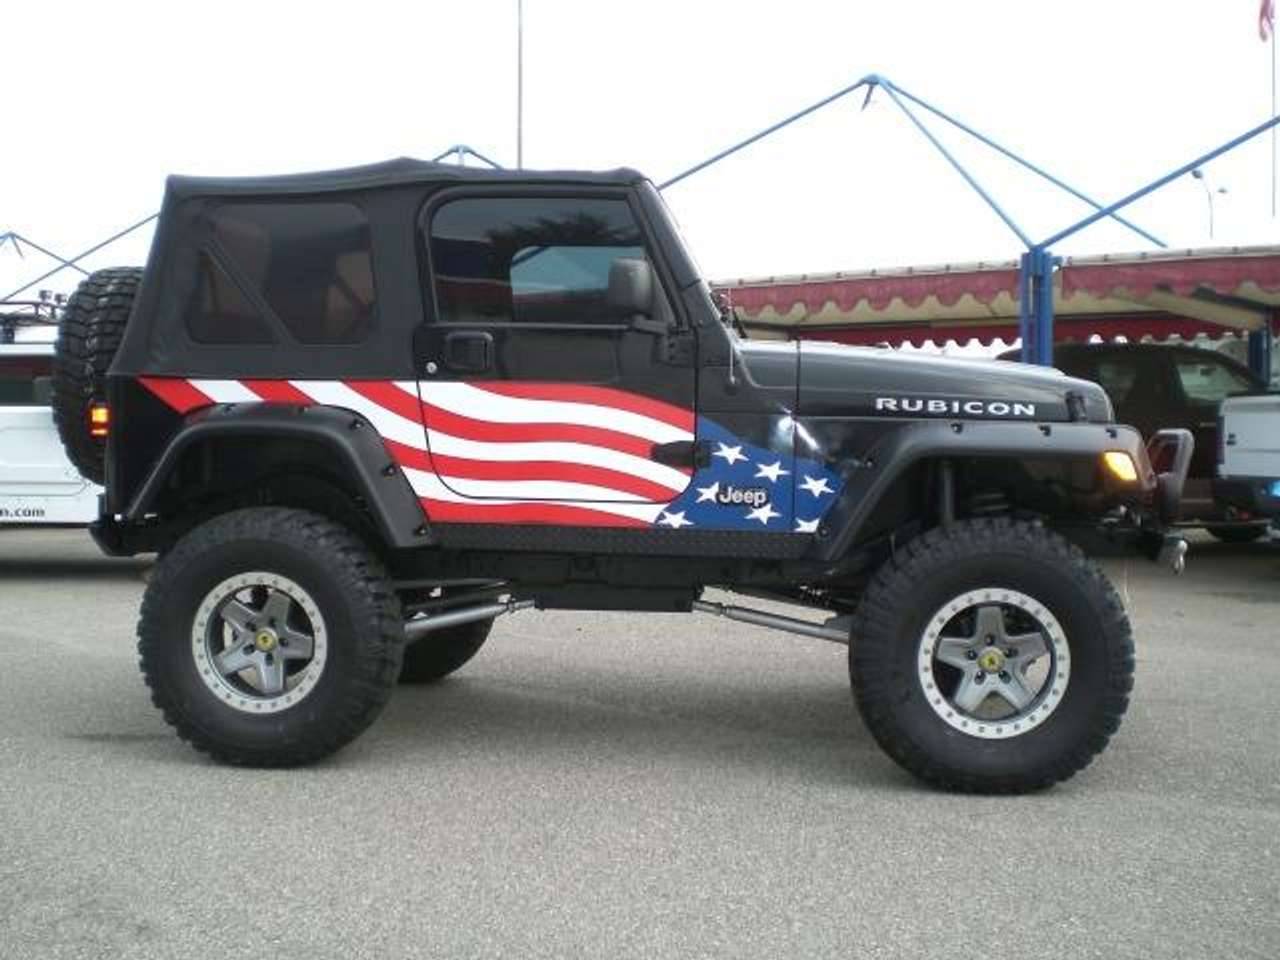 For Sale Jeep Wrangler Sport 4.0 (2006) offered for AUD